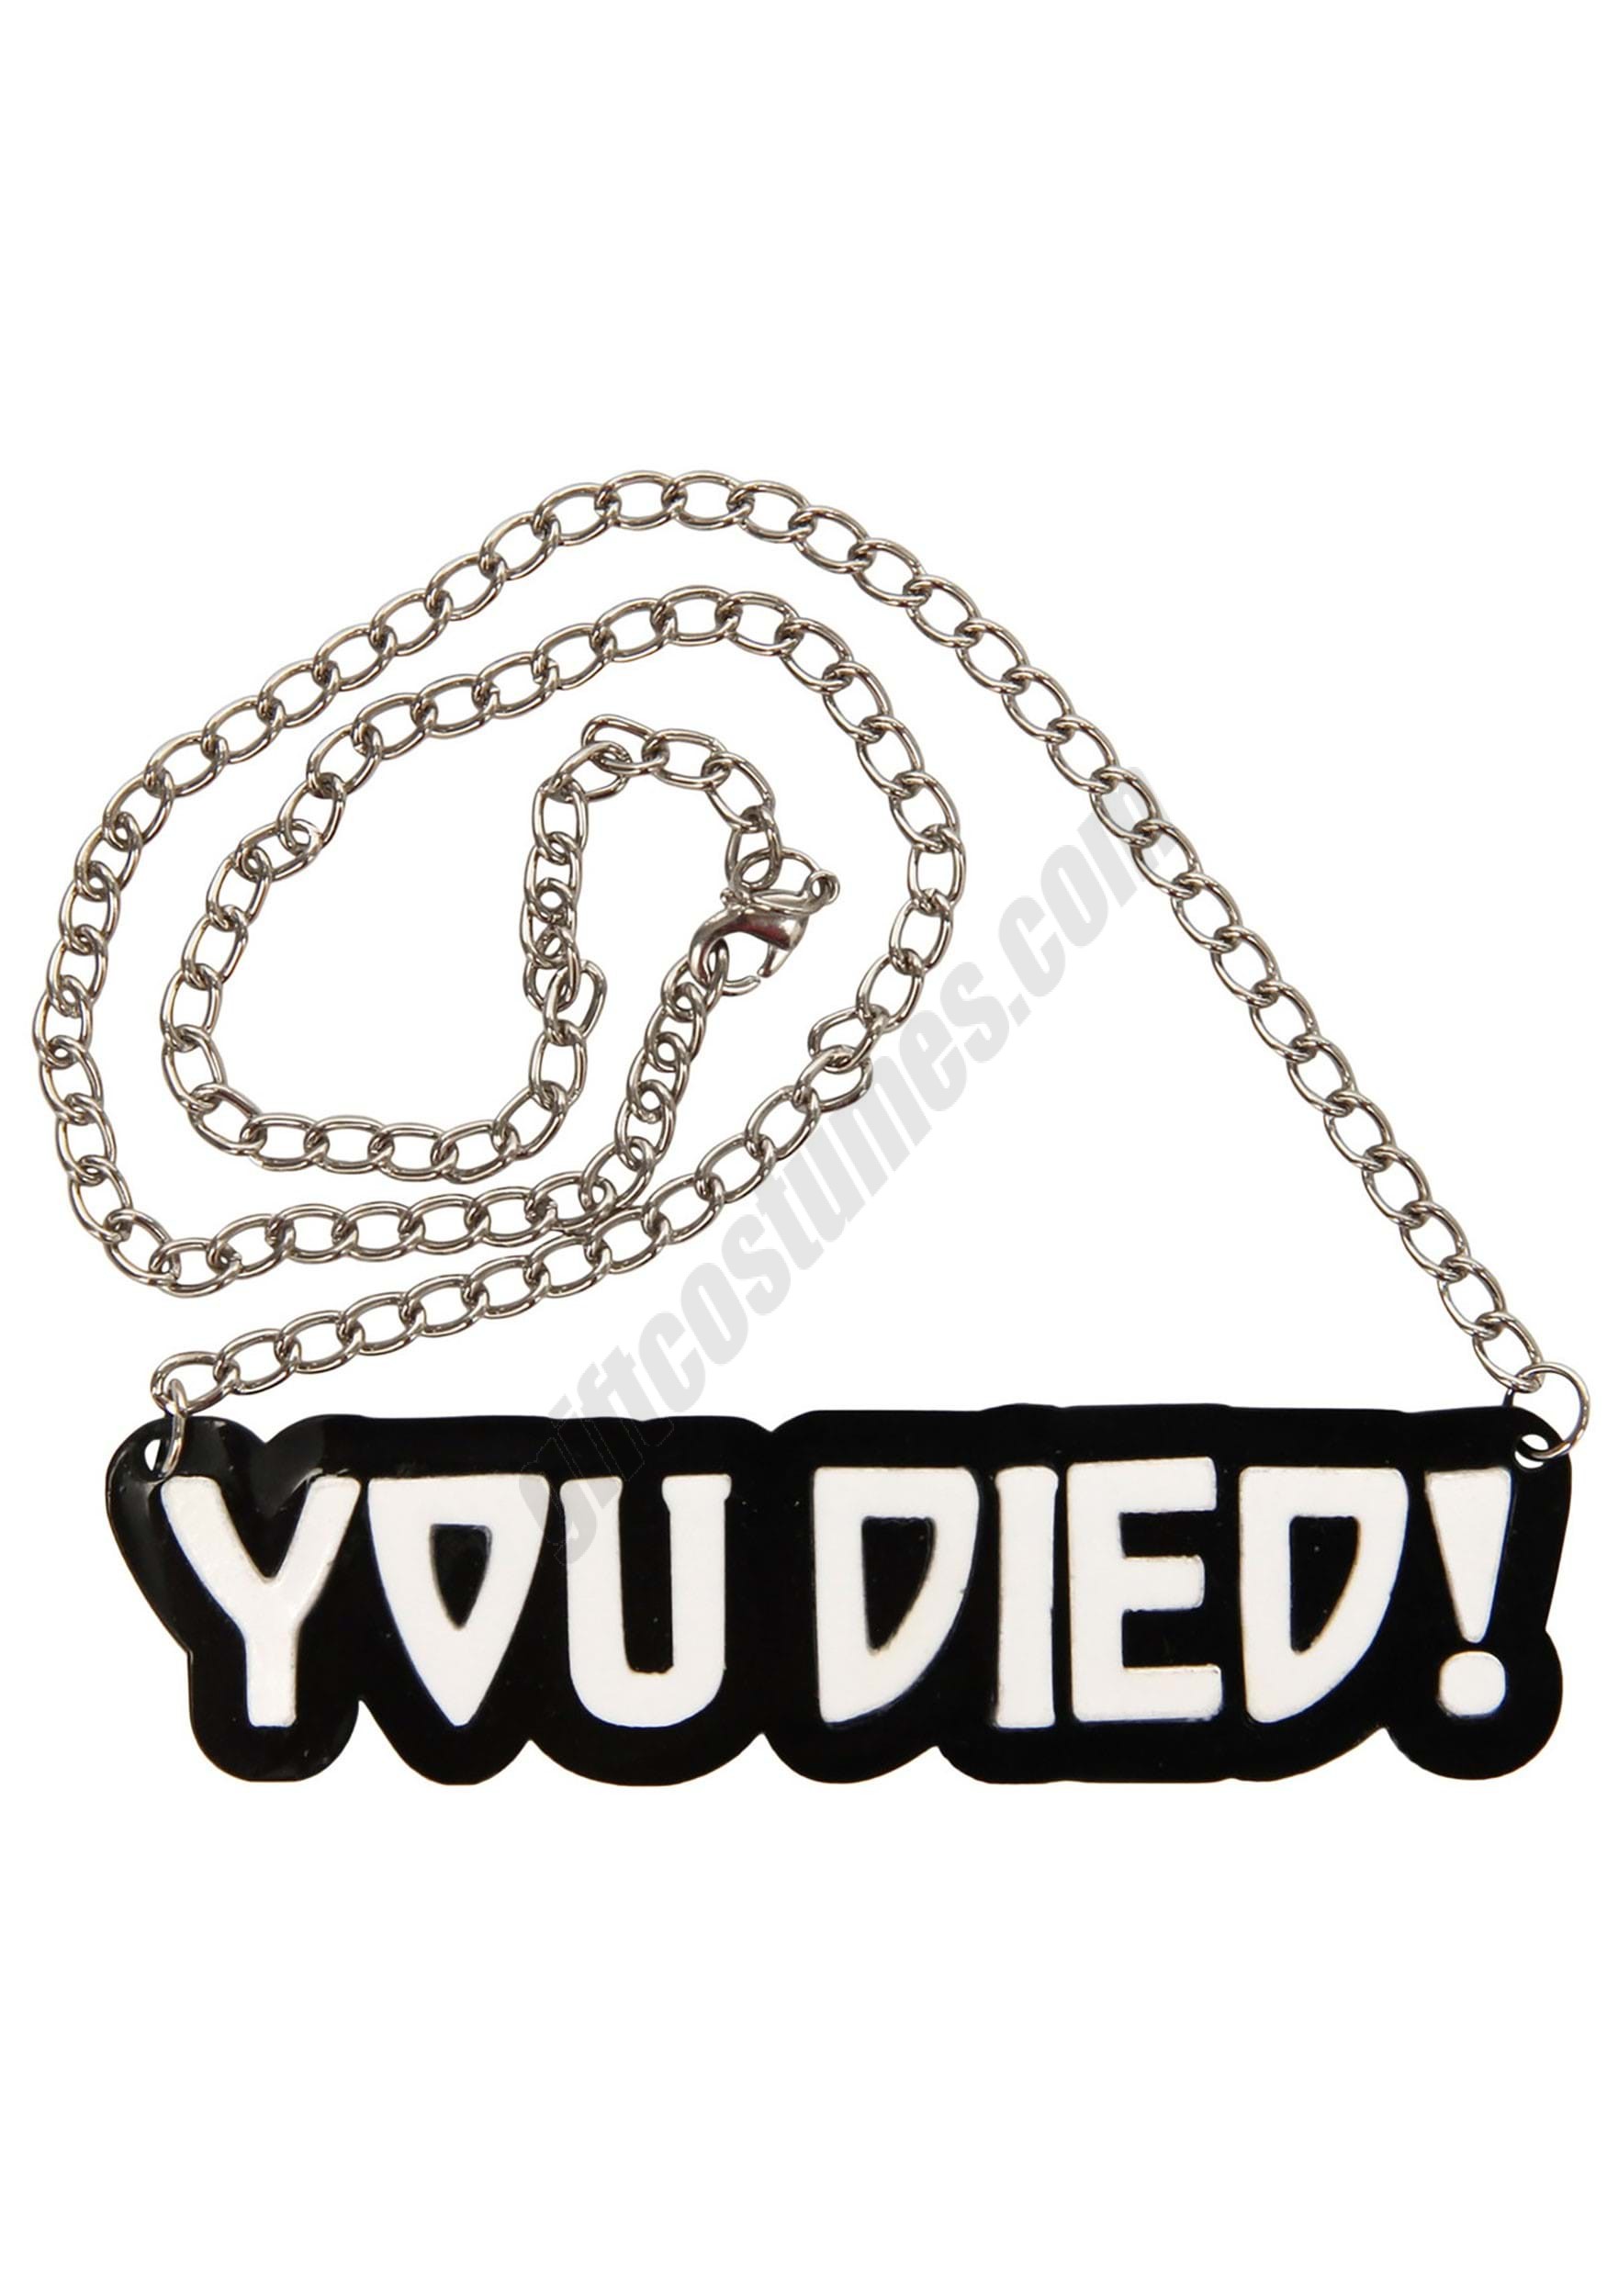 Necklace  You Died! Necklace  Promotions - Necklace  You Died! Necklace  Promotions